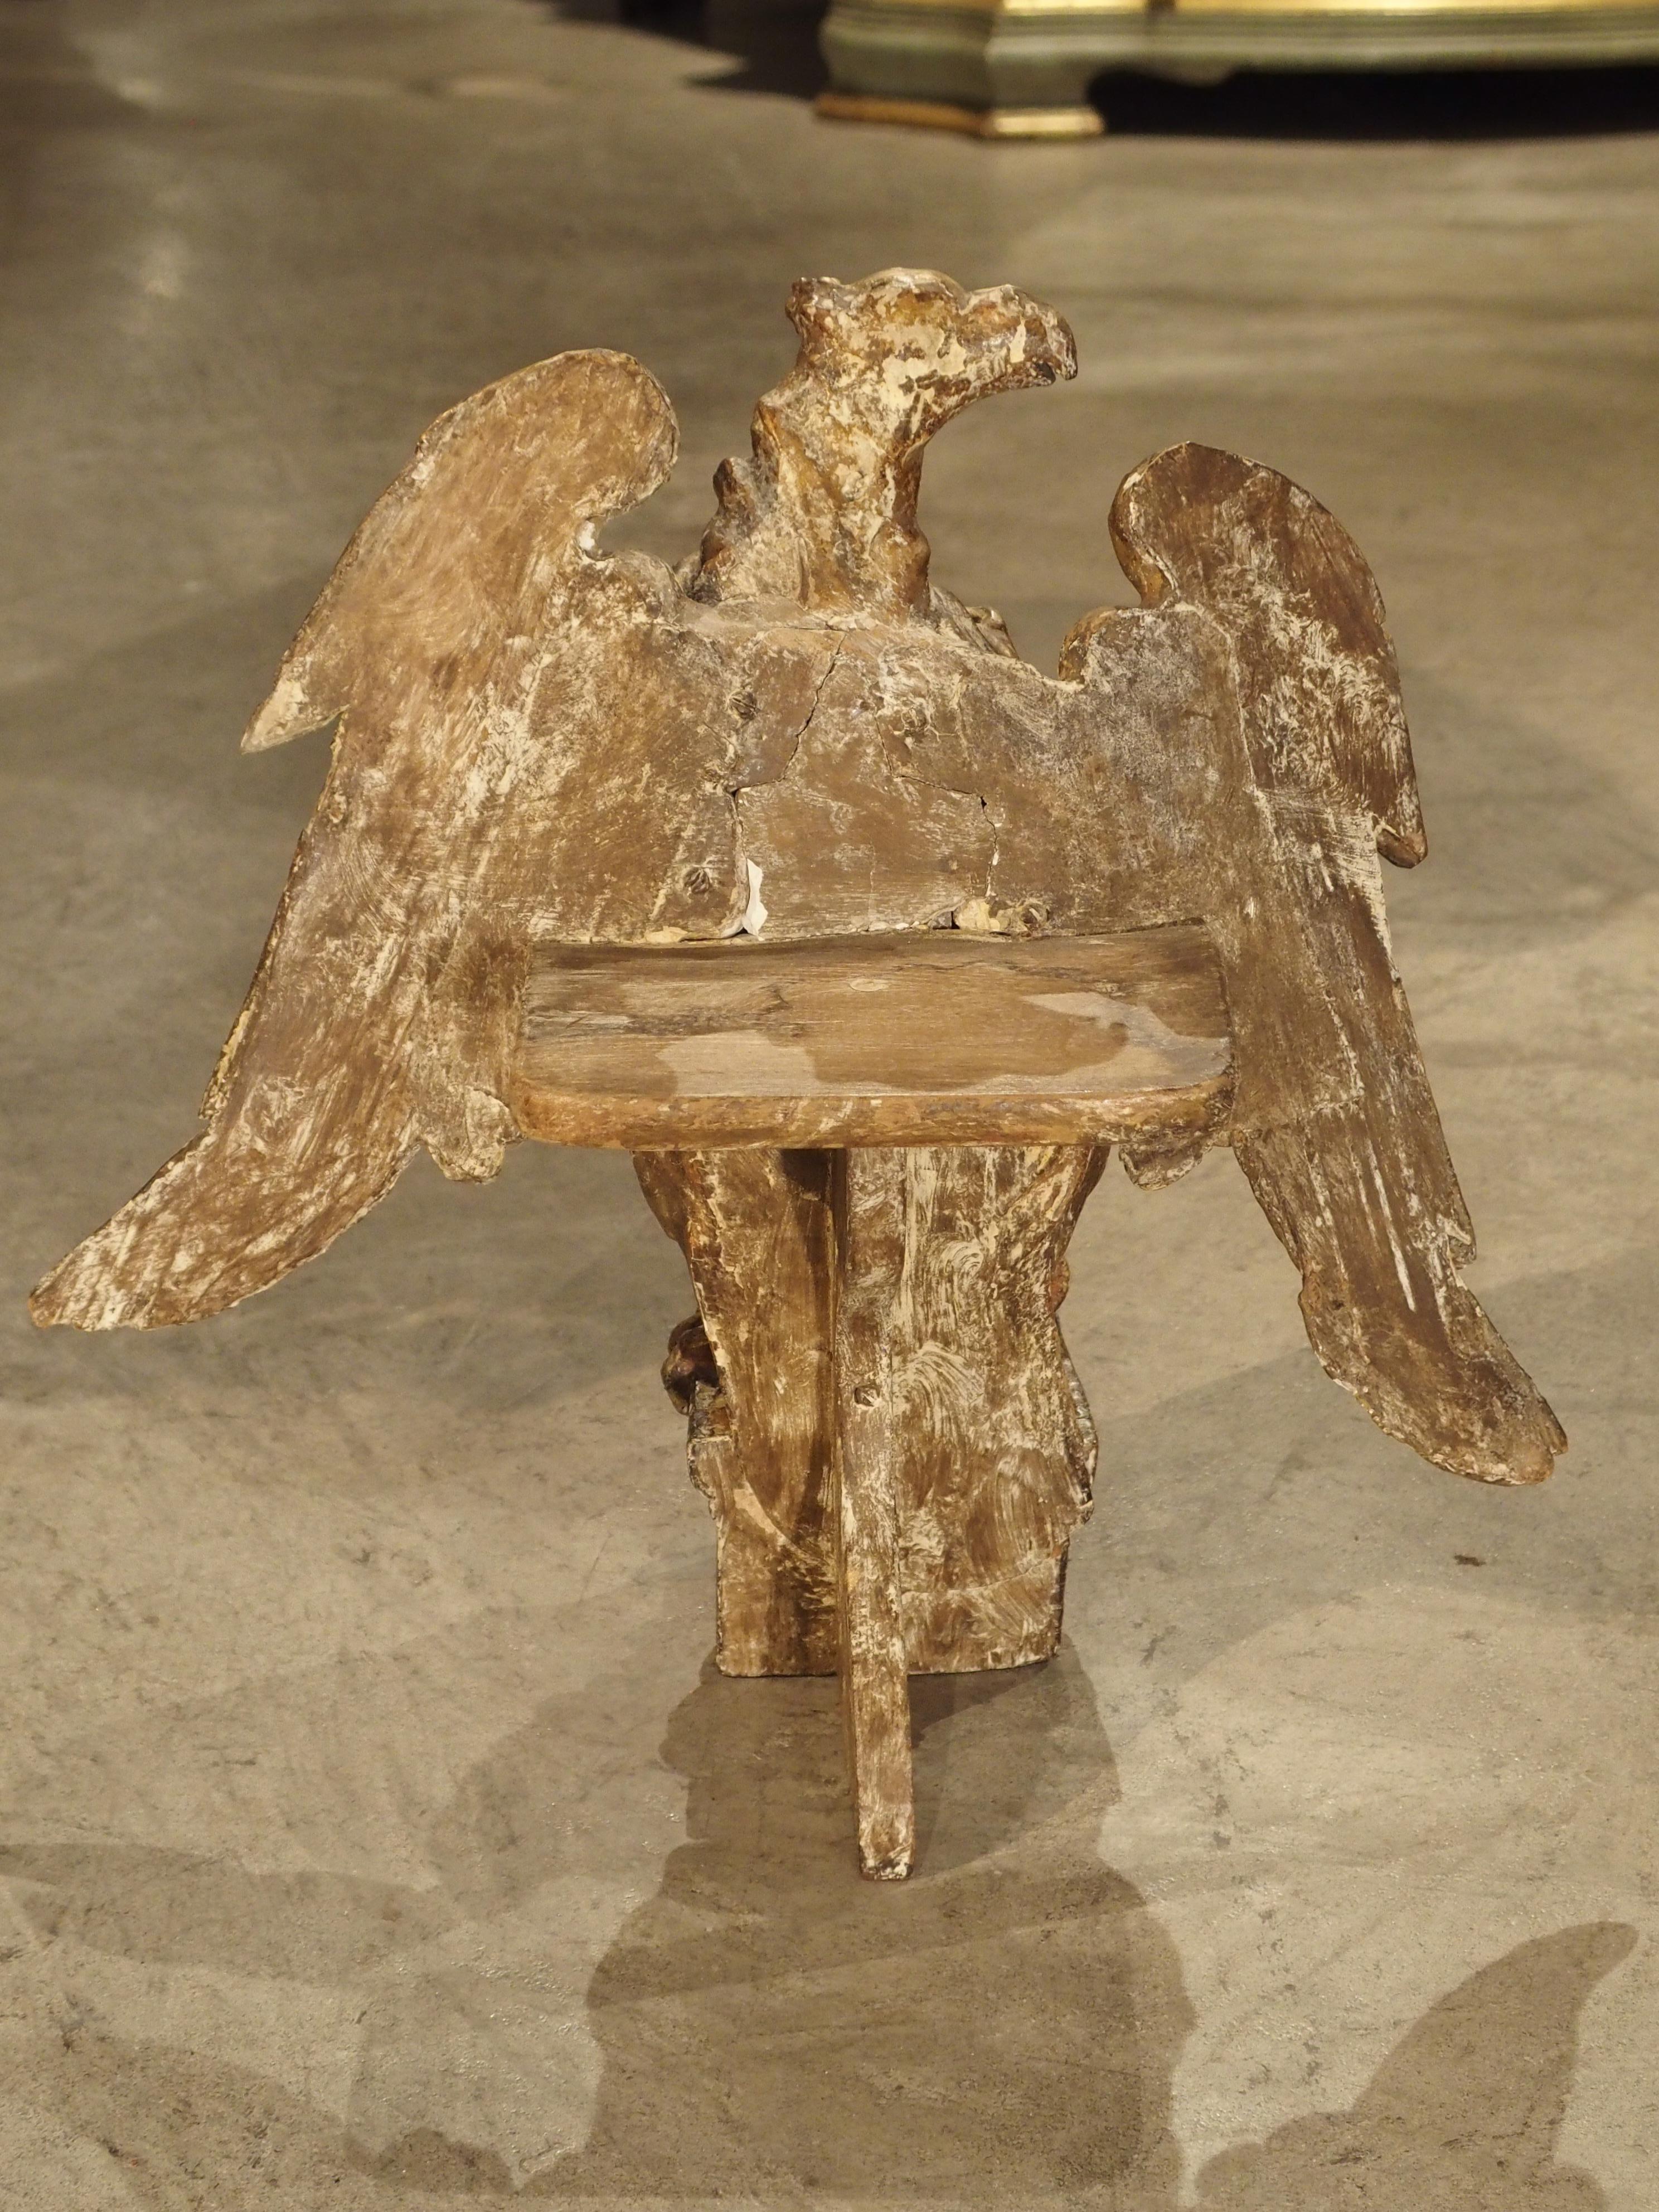 From the 1700s, this hand-carved Italian eagle is holding a cartouche with his right foot while his left foot clutches the platform beneath him. We believe this platform would have been placed into another element as there is a hole going all the